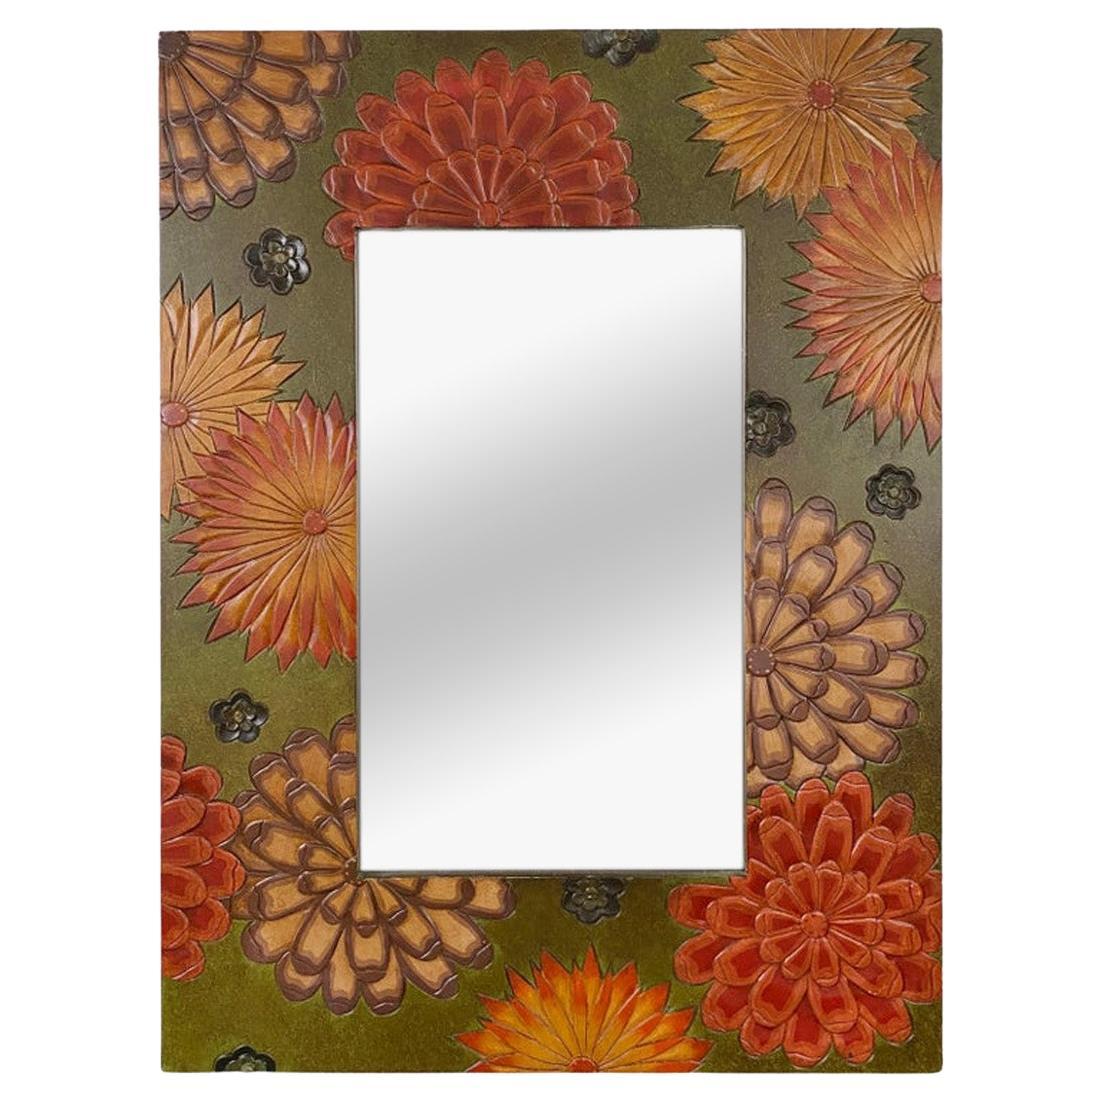 Boho Chic  Sunflowers Design Wall or Vanity Mirror with Wooden Carved Frame  For Sale